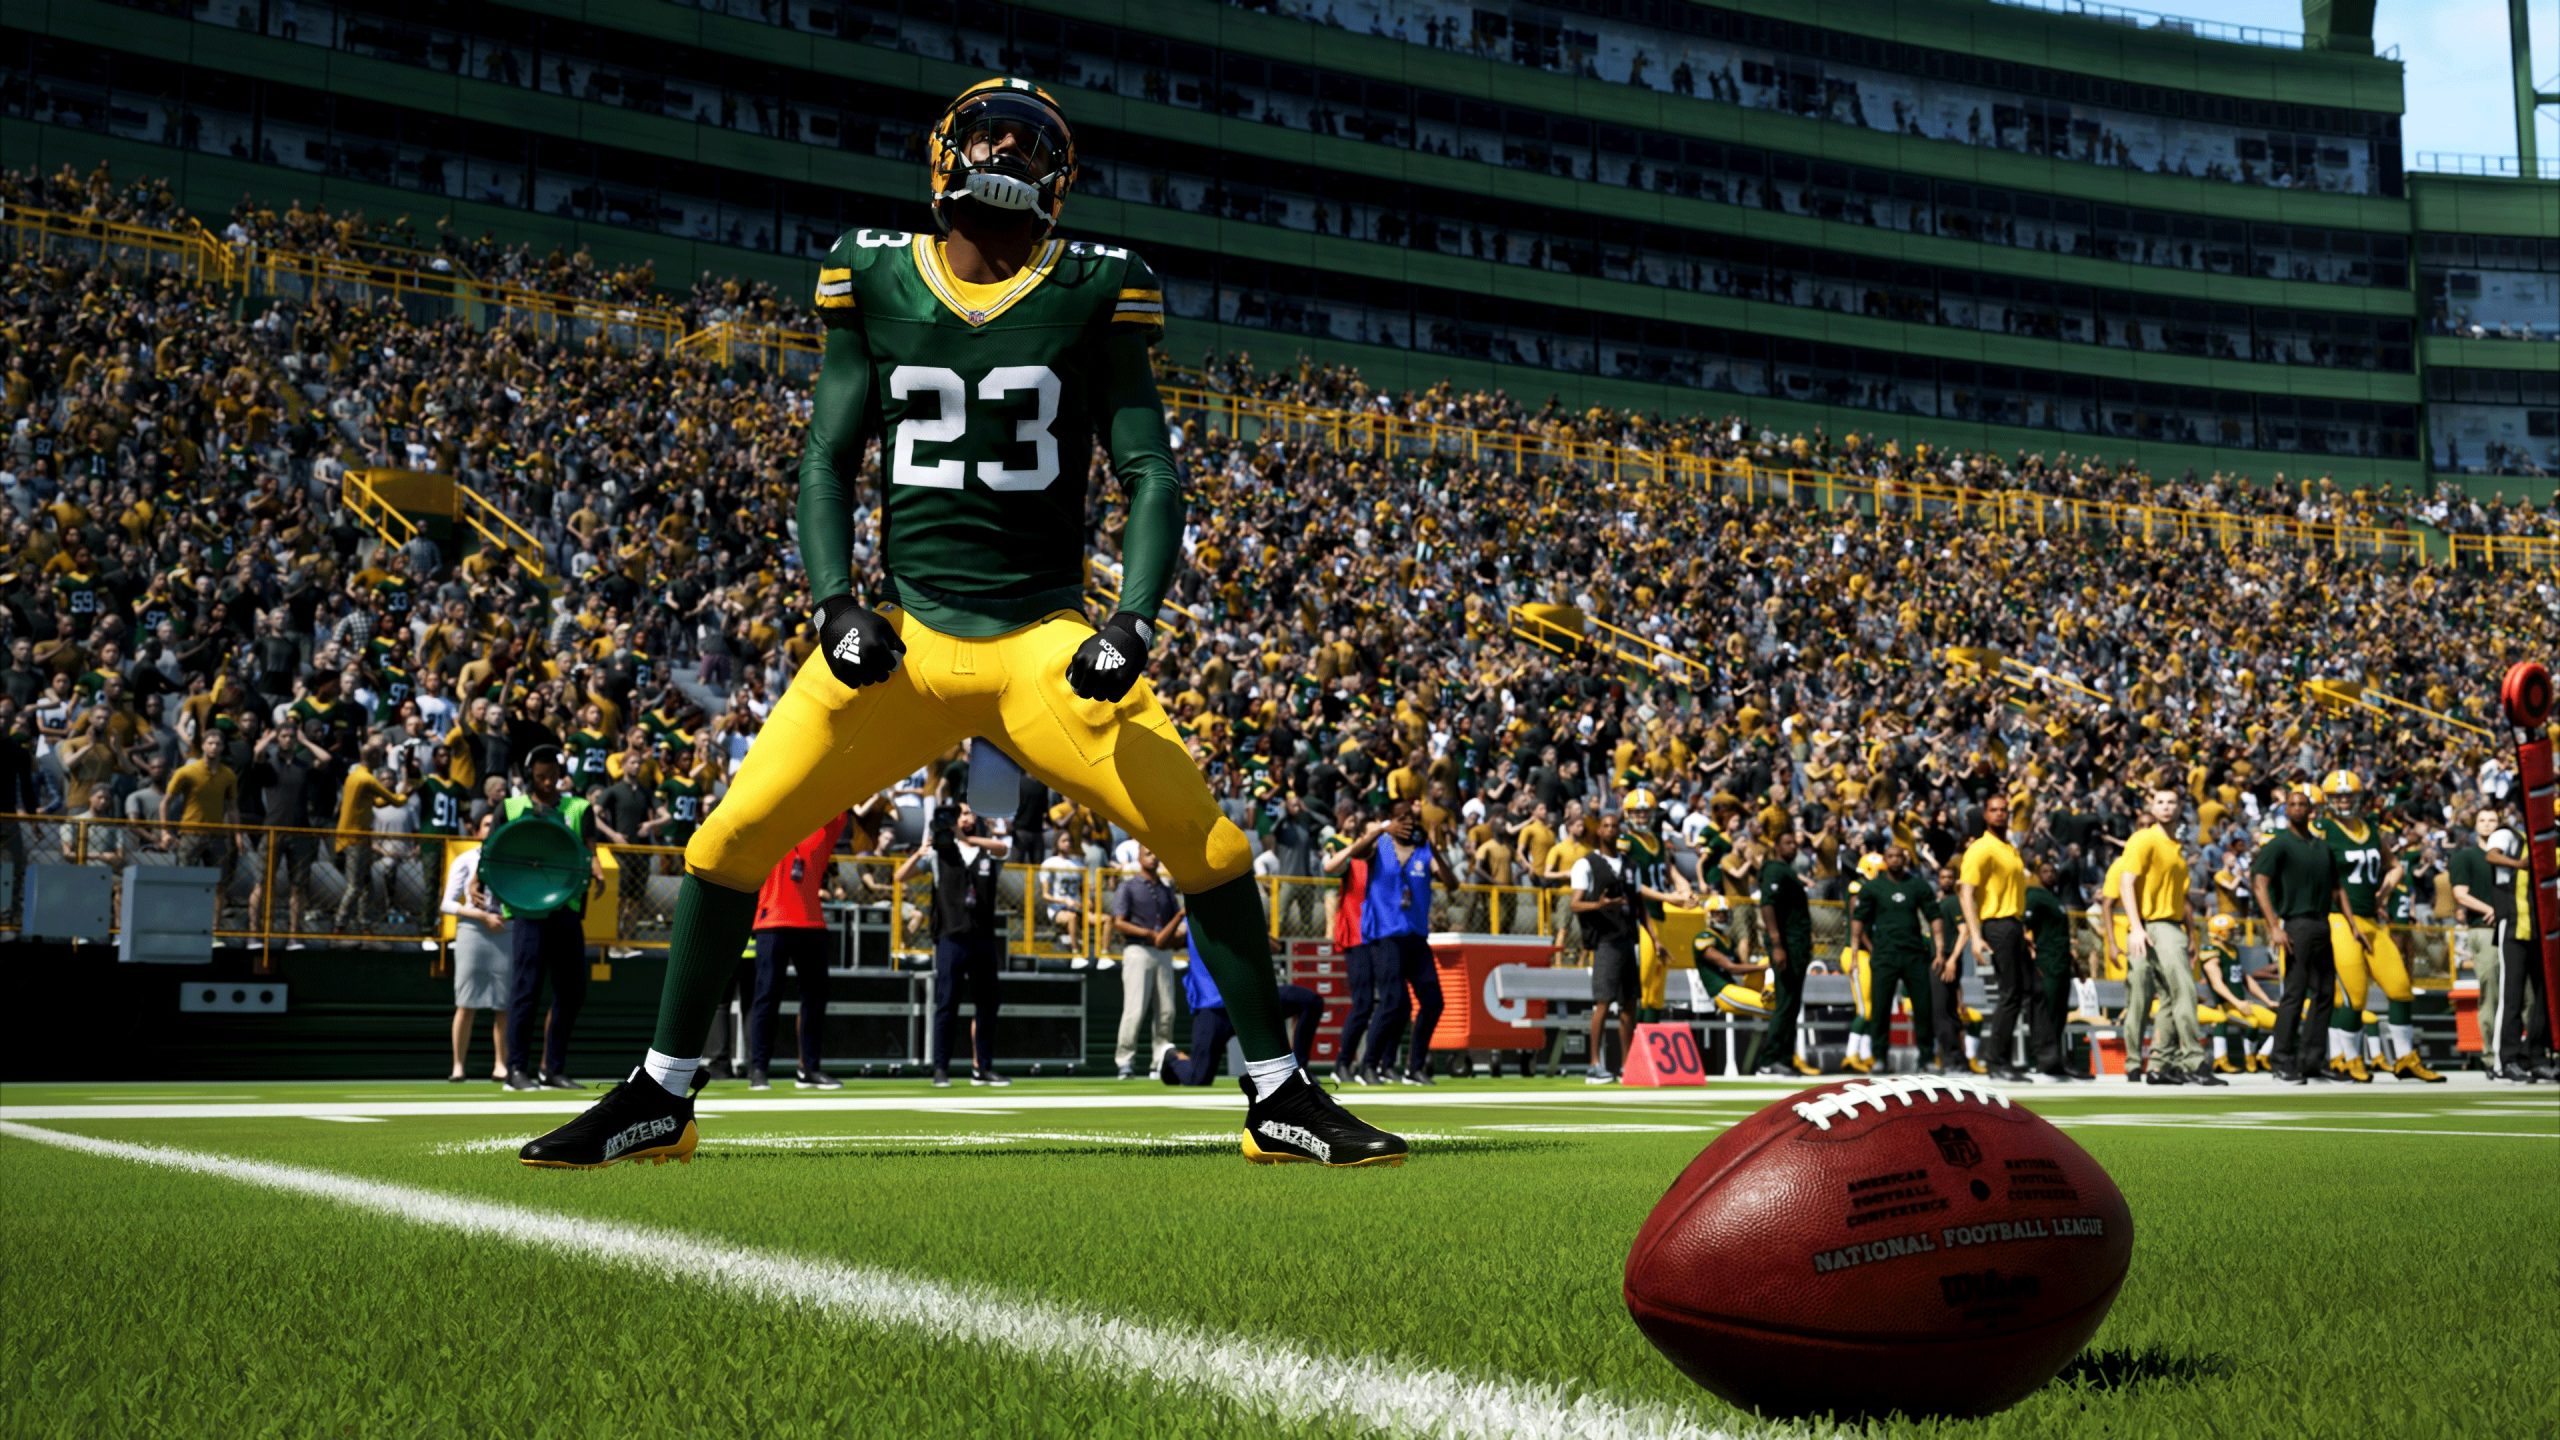 Madden NFL 20 review: This Year's Madden Is All About Ultimate Team